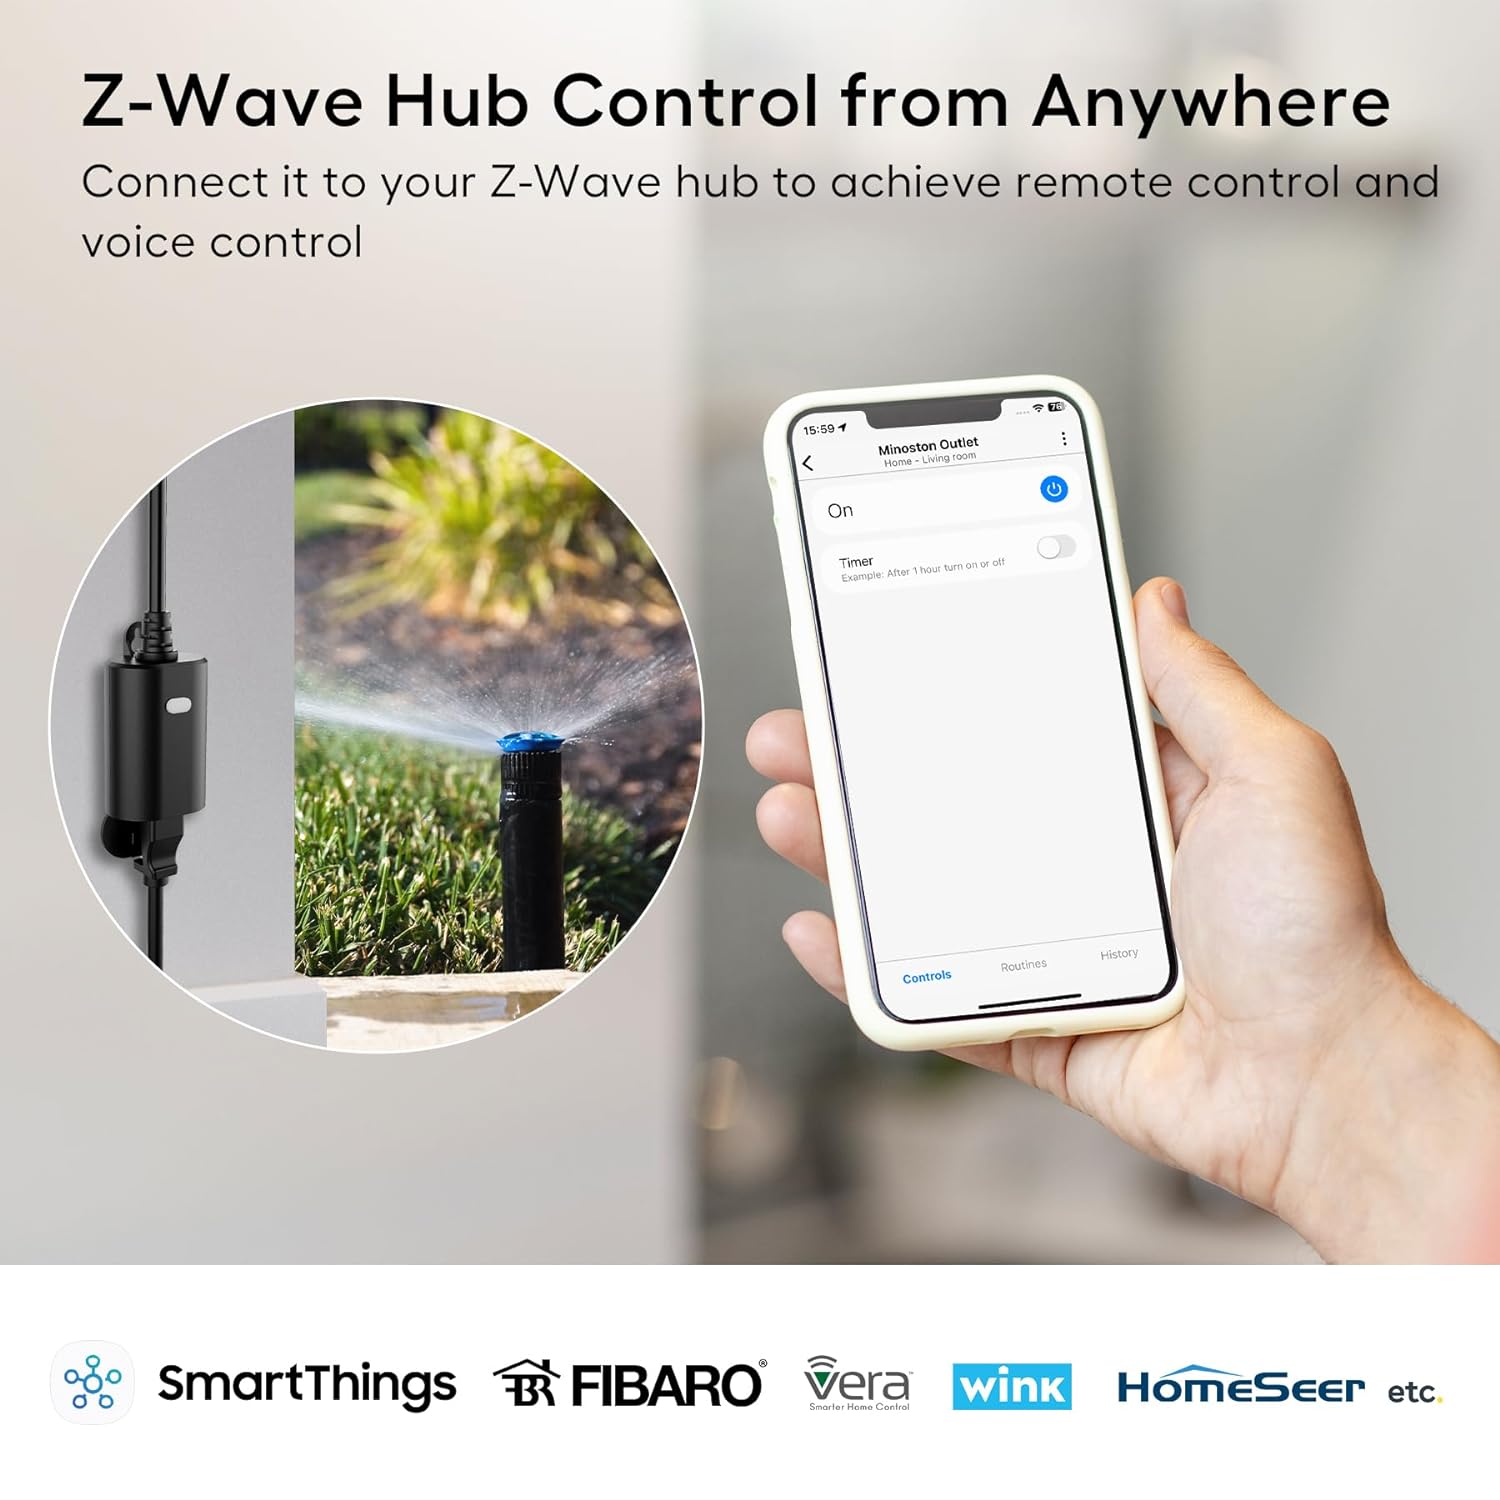 Z-Wave Smart Plugs Work with Alexa, Z-Wave Hub Required, Built-in Repeater,  Black, 15A(MP22Z)